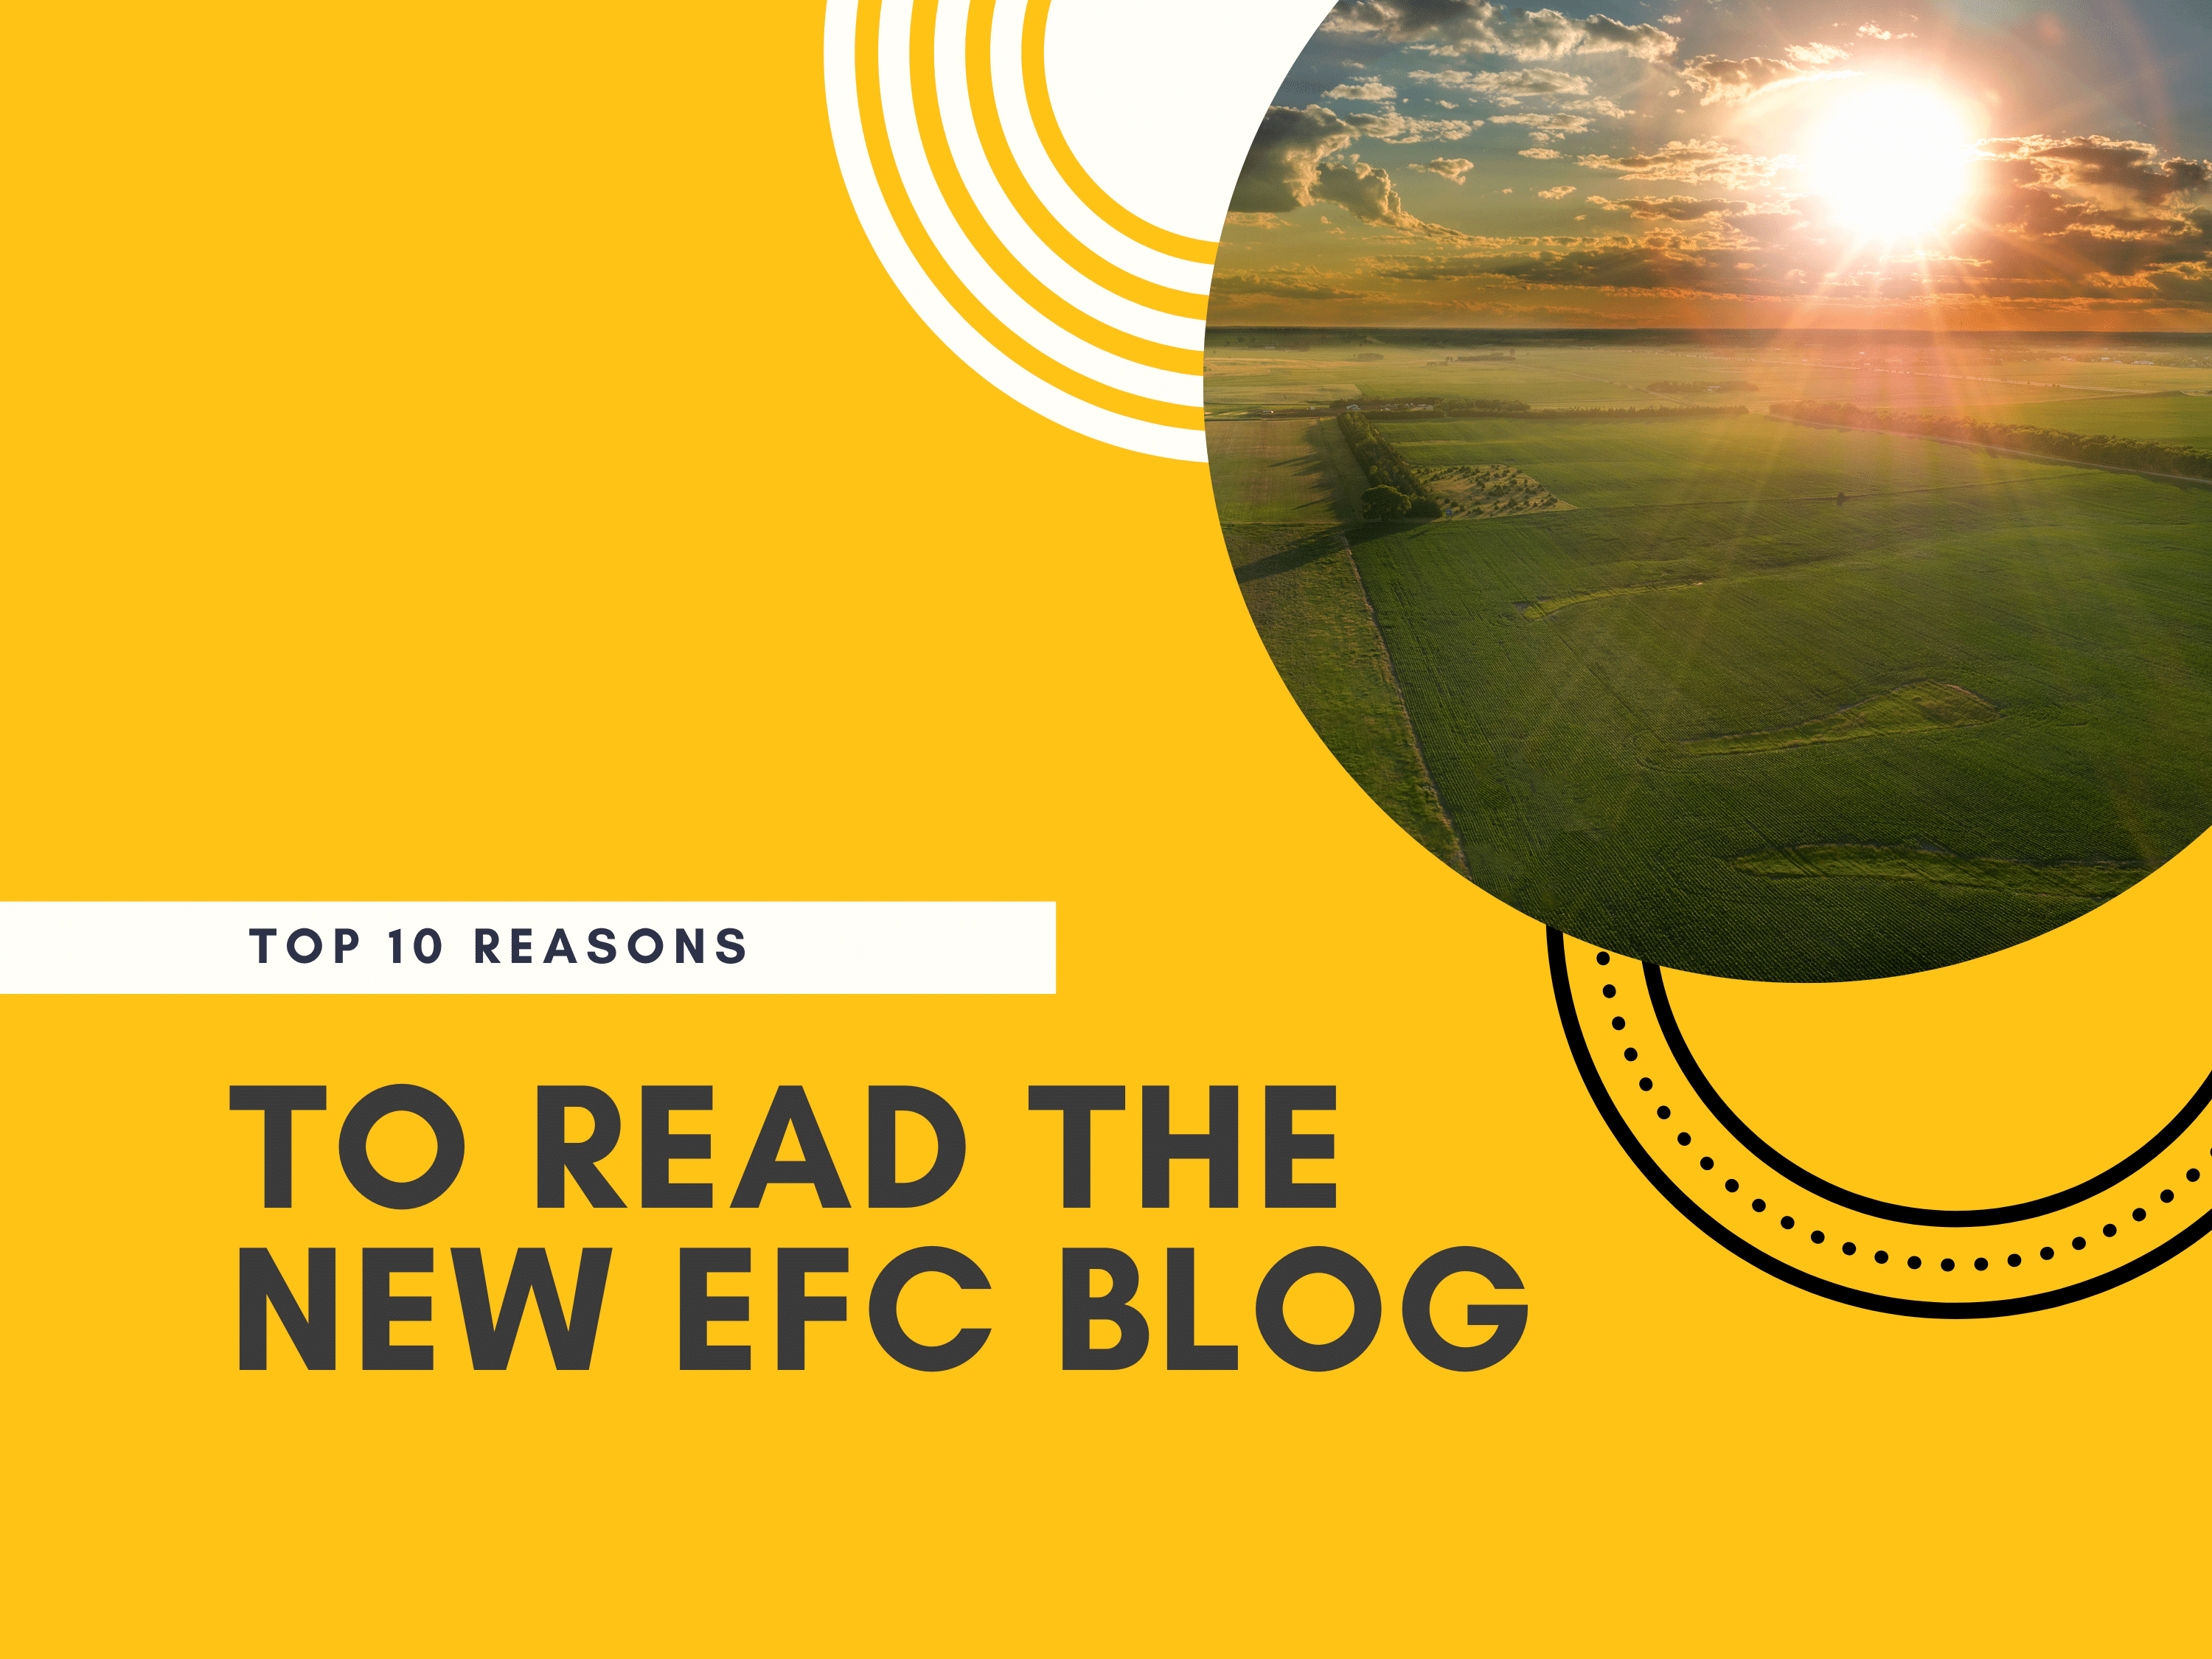 Top 10 Reasons to Read the New EFC Blog